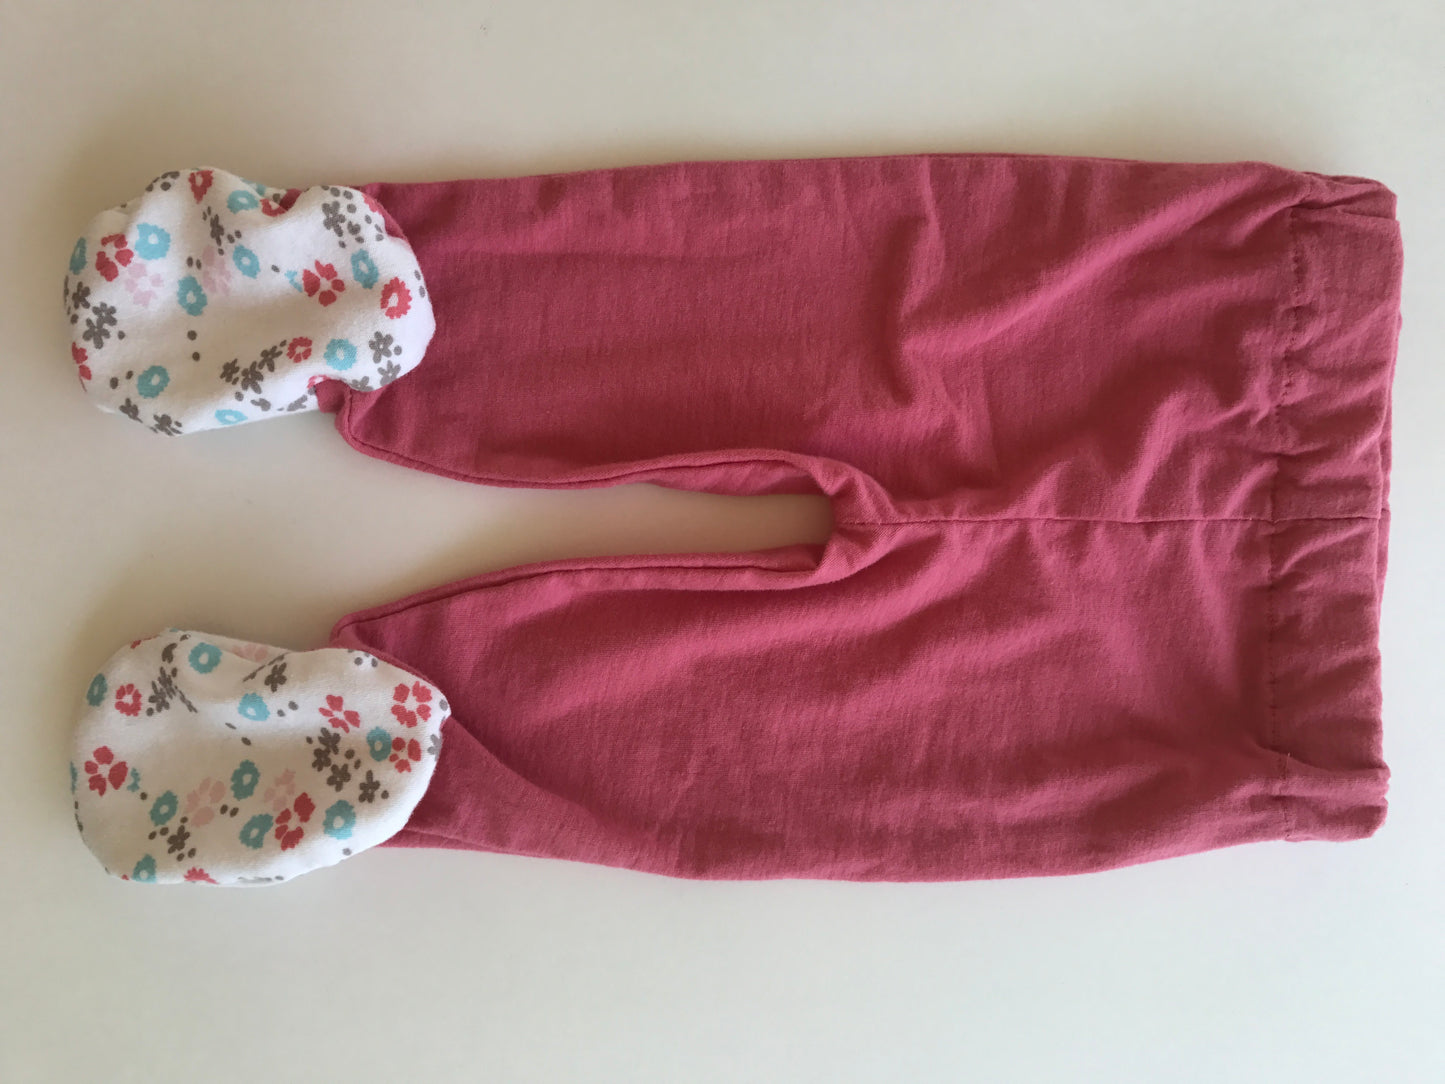 OOAK Footed Pajamas, 6M, Pajama Set, PJs with Feet, Pants with Feet, Girls Infant Sleepwear, Cotton Knit Footie Pants, Summer, Shower Gift